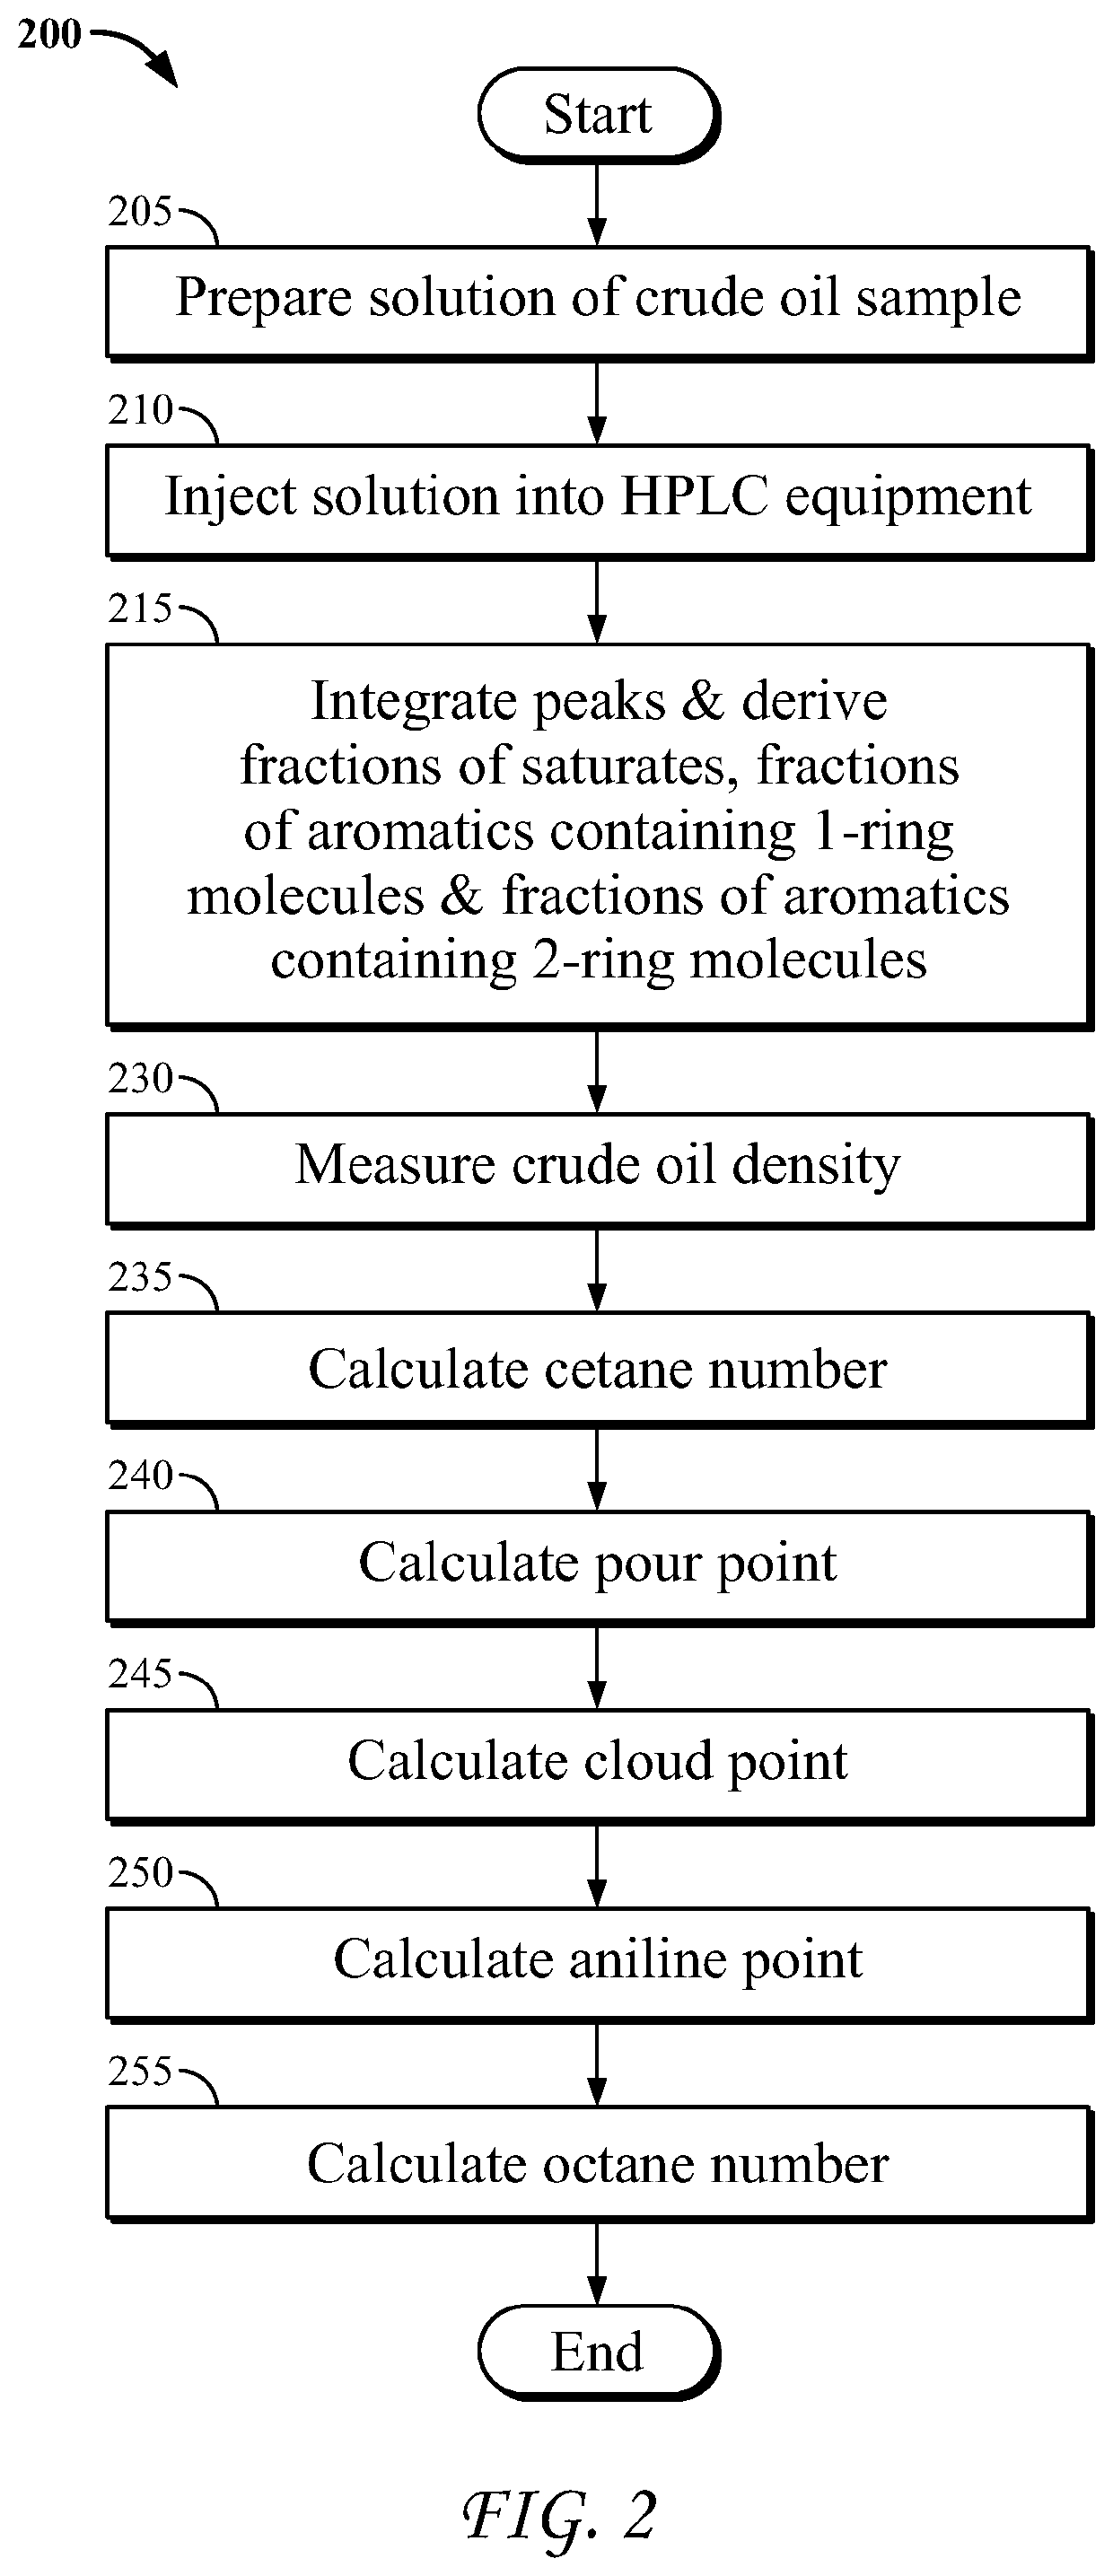 Characterization of crude oil by high pressure liquid chromatography